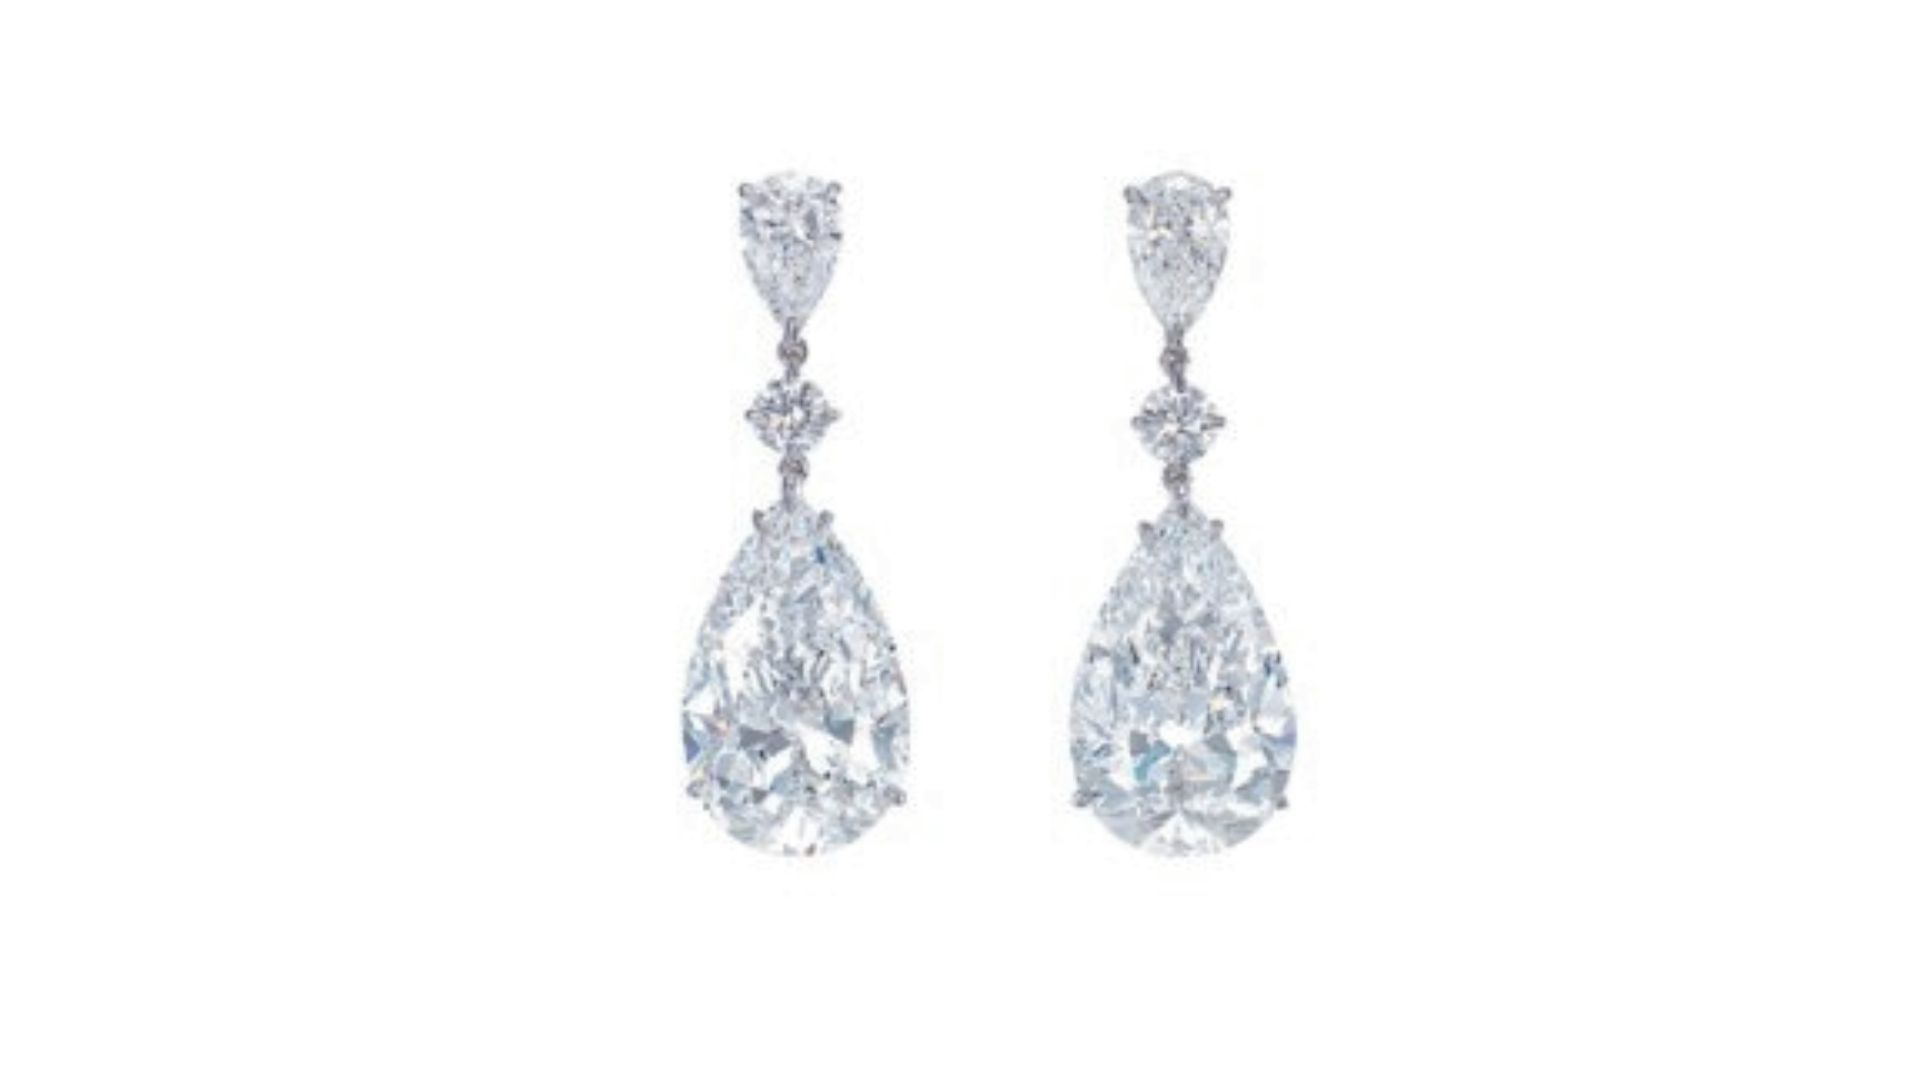 Expensive earrings - Magnificent